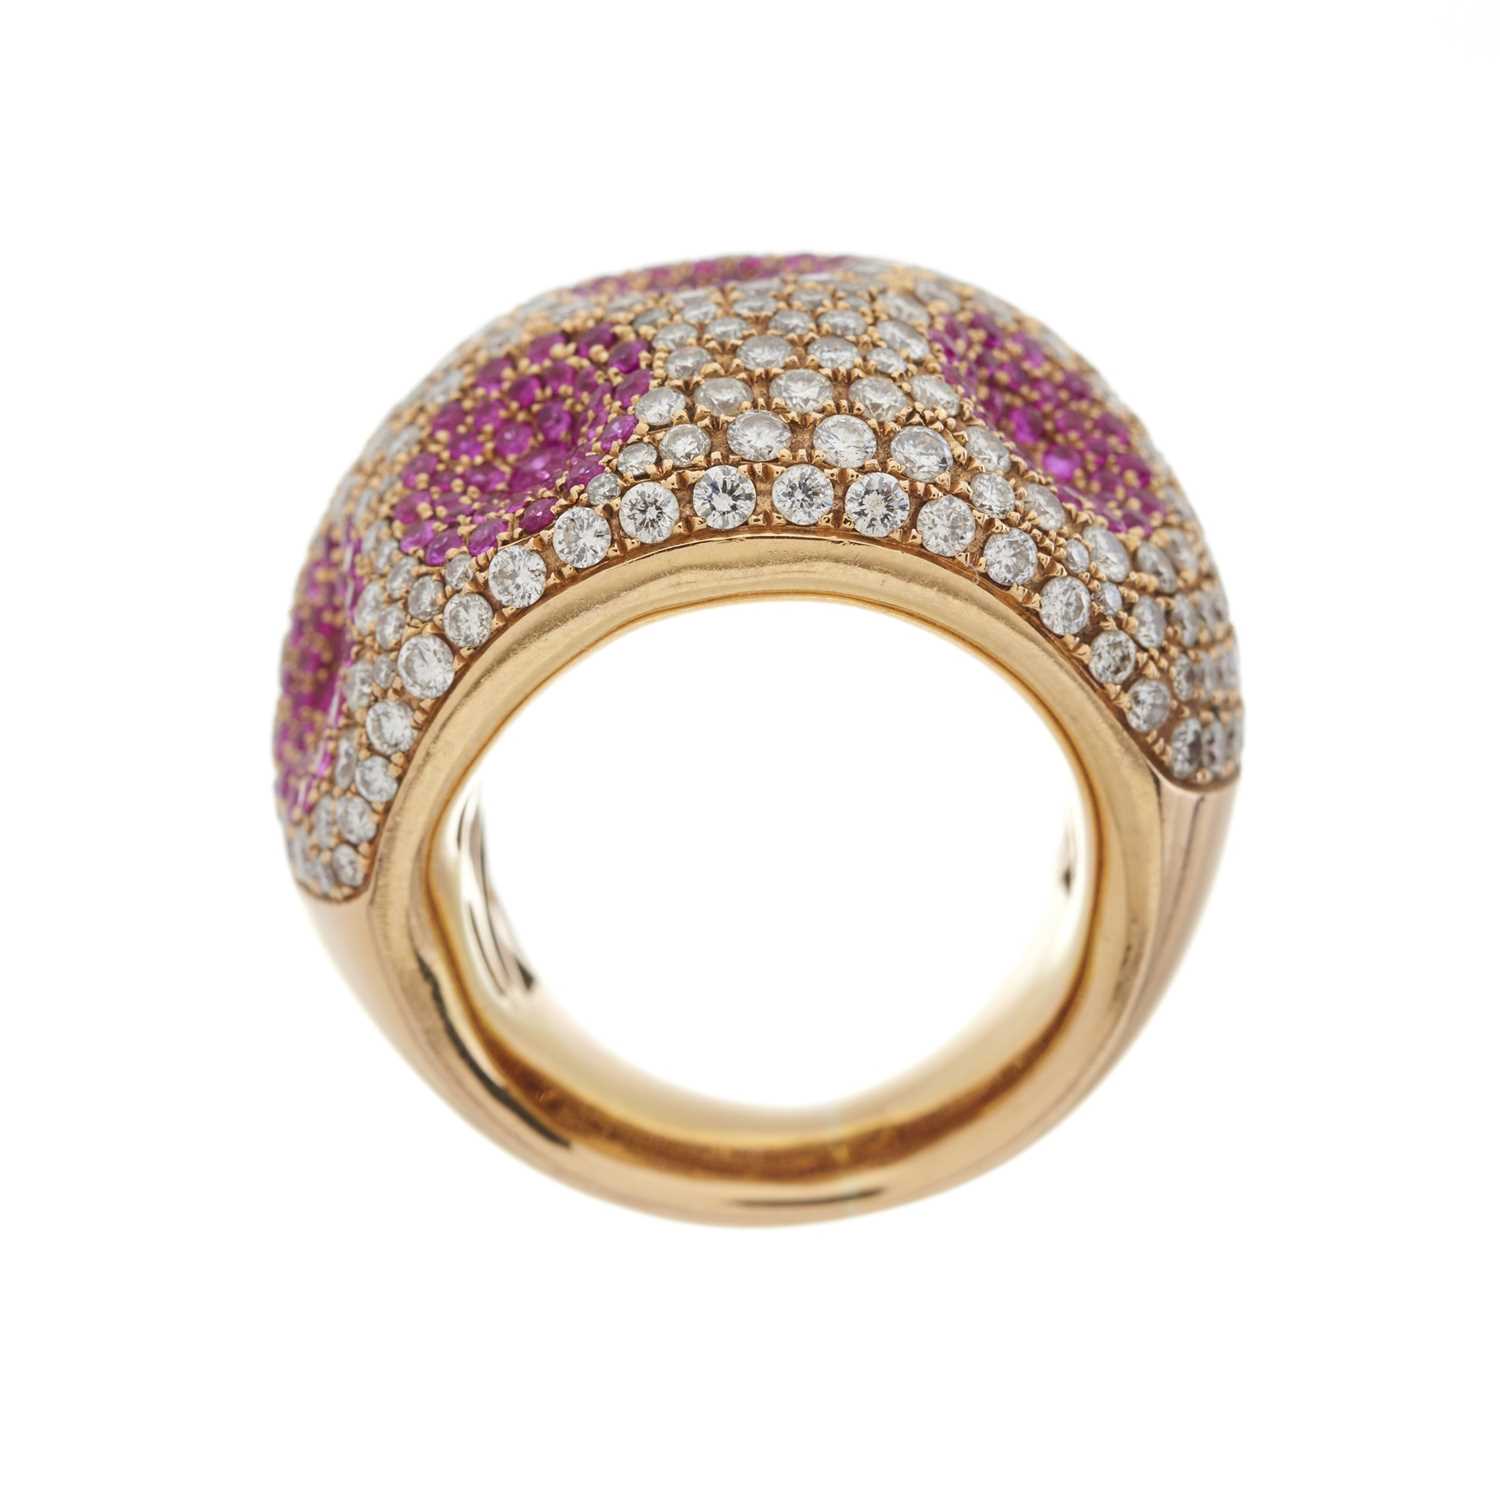 An 18ct gold diamond and pink sapphire cocktail ring - Image 2 of 3